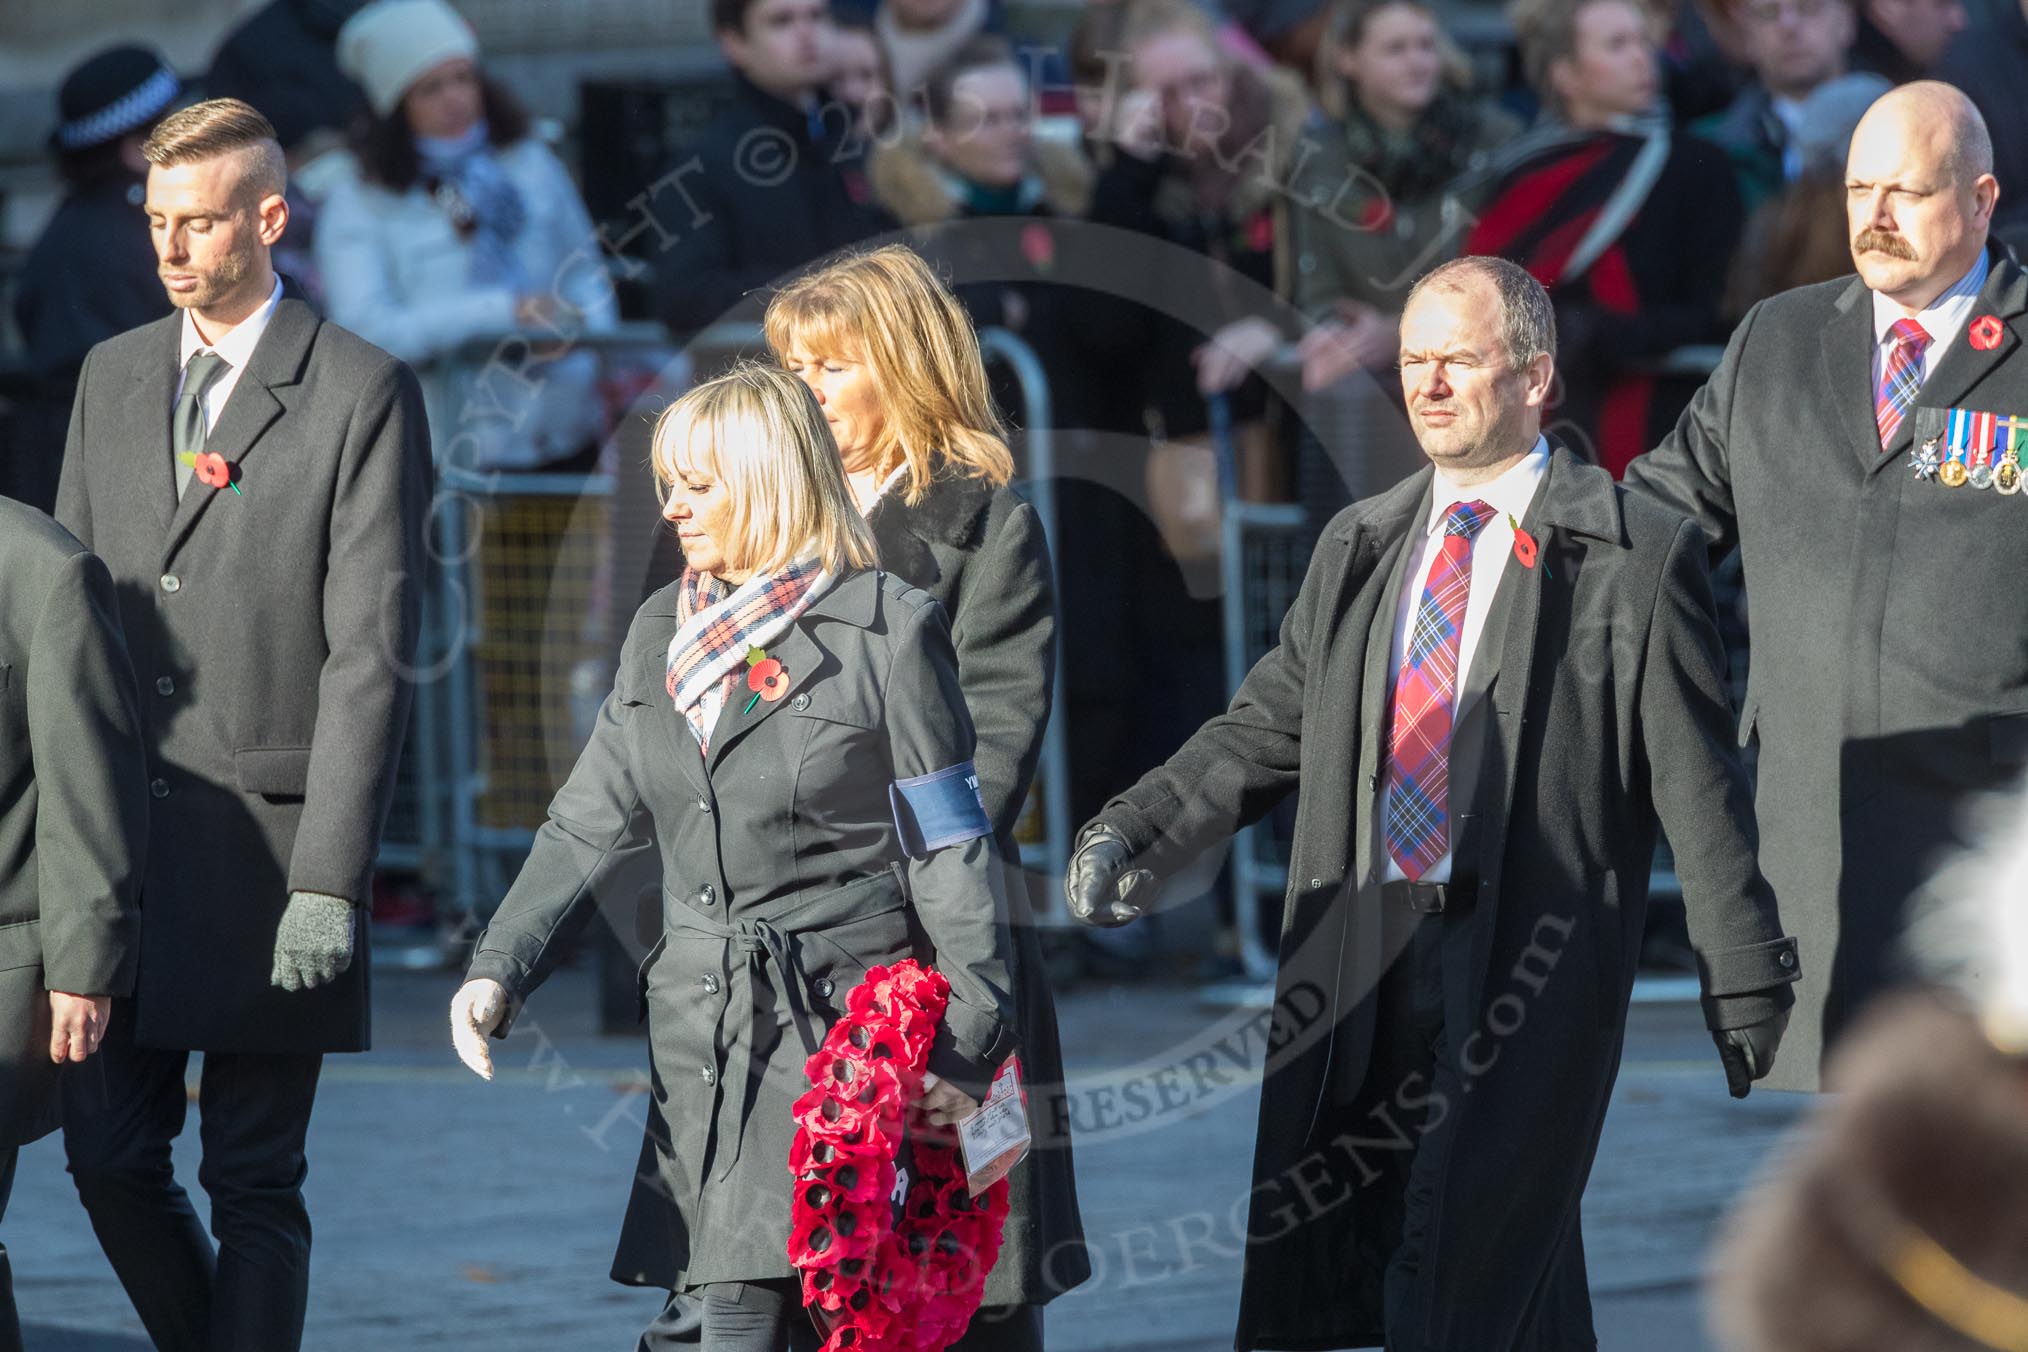 March Past, Remembrance Sunday at the Cenotaph 2016: M37 YMCA.
Cenotaph, Whitehall, London SW1,
London,
Greater London,
United Kingdom,
on 13 November 2016 at 13:19, image #2910